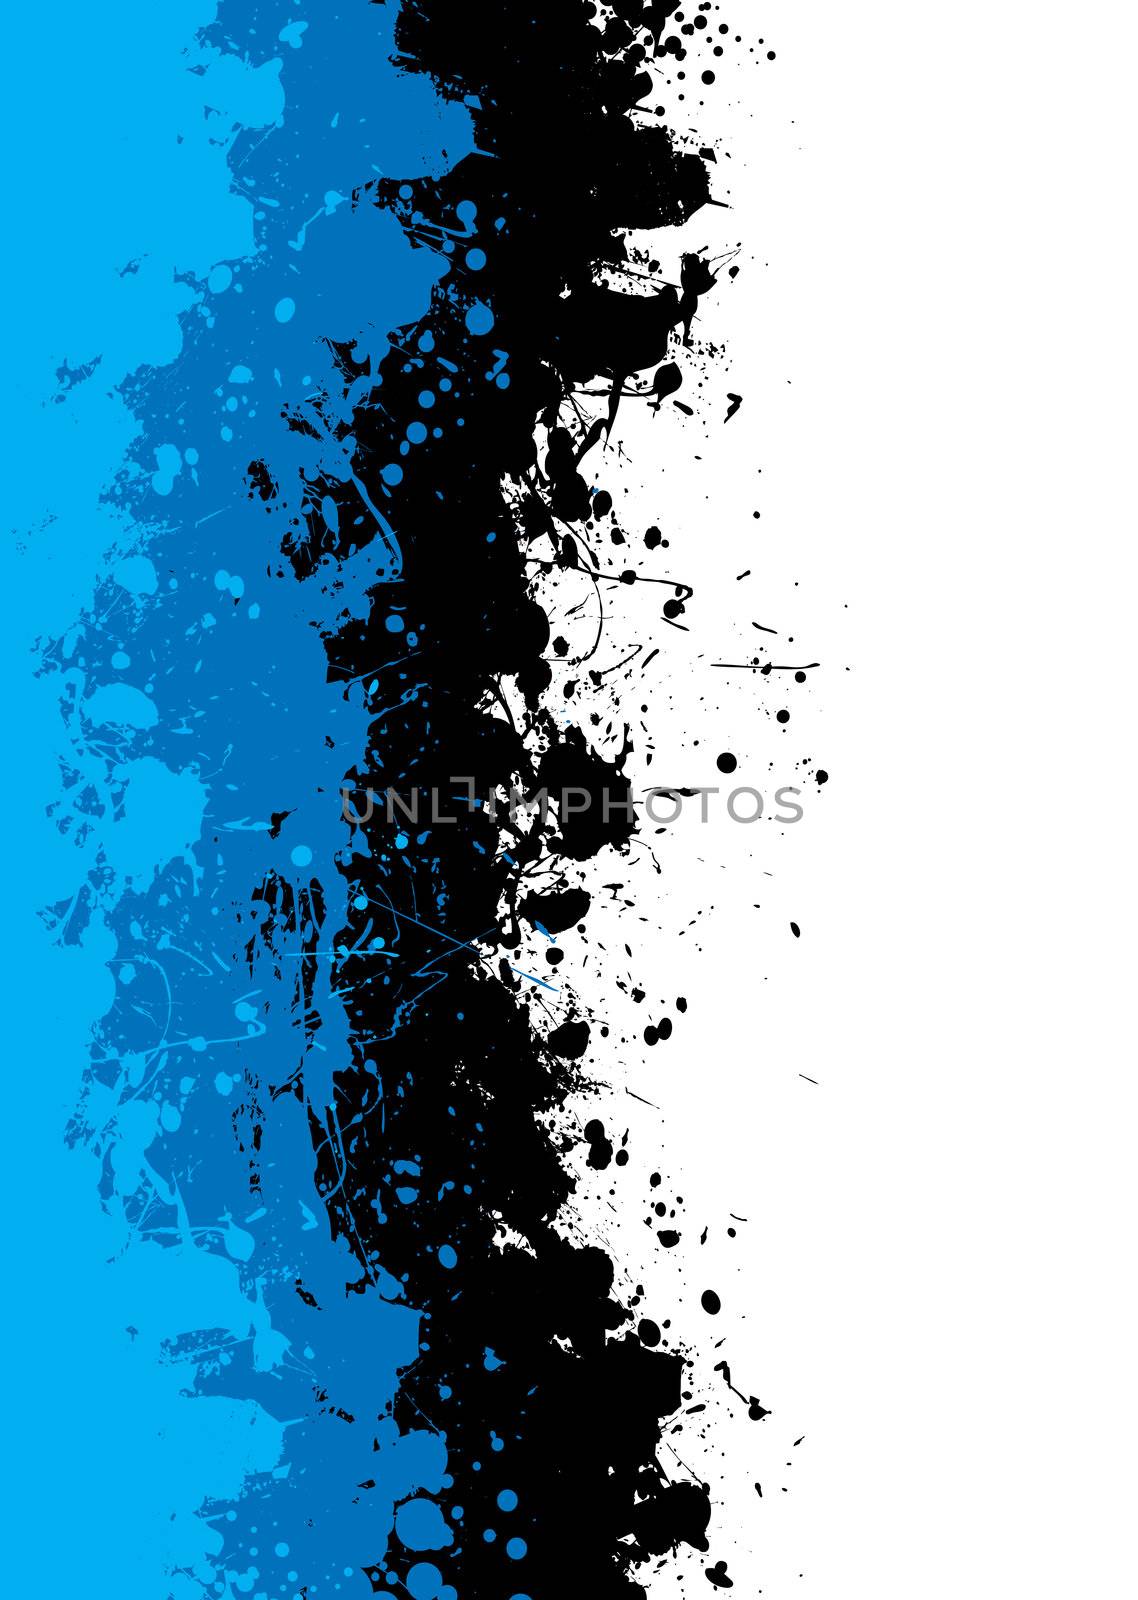 Abstract shades of blue grunge background with ink spalt